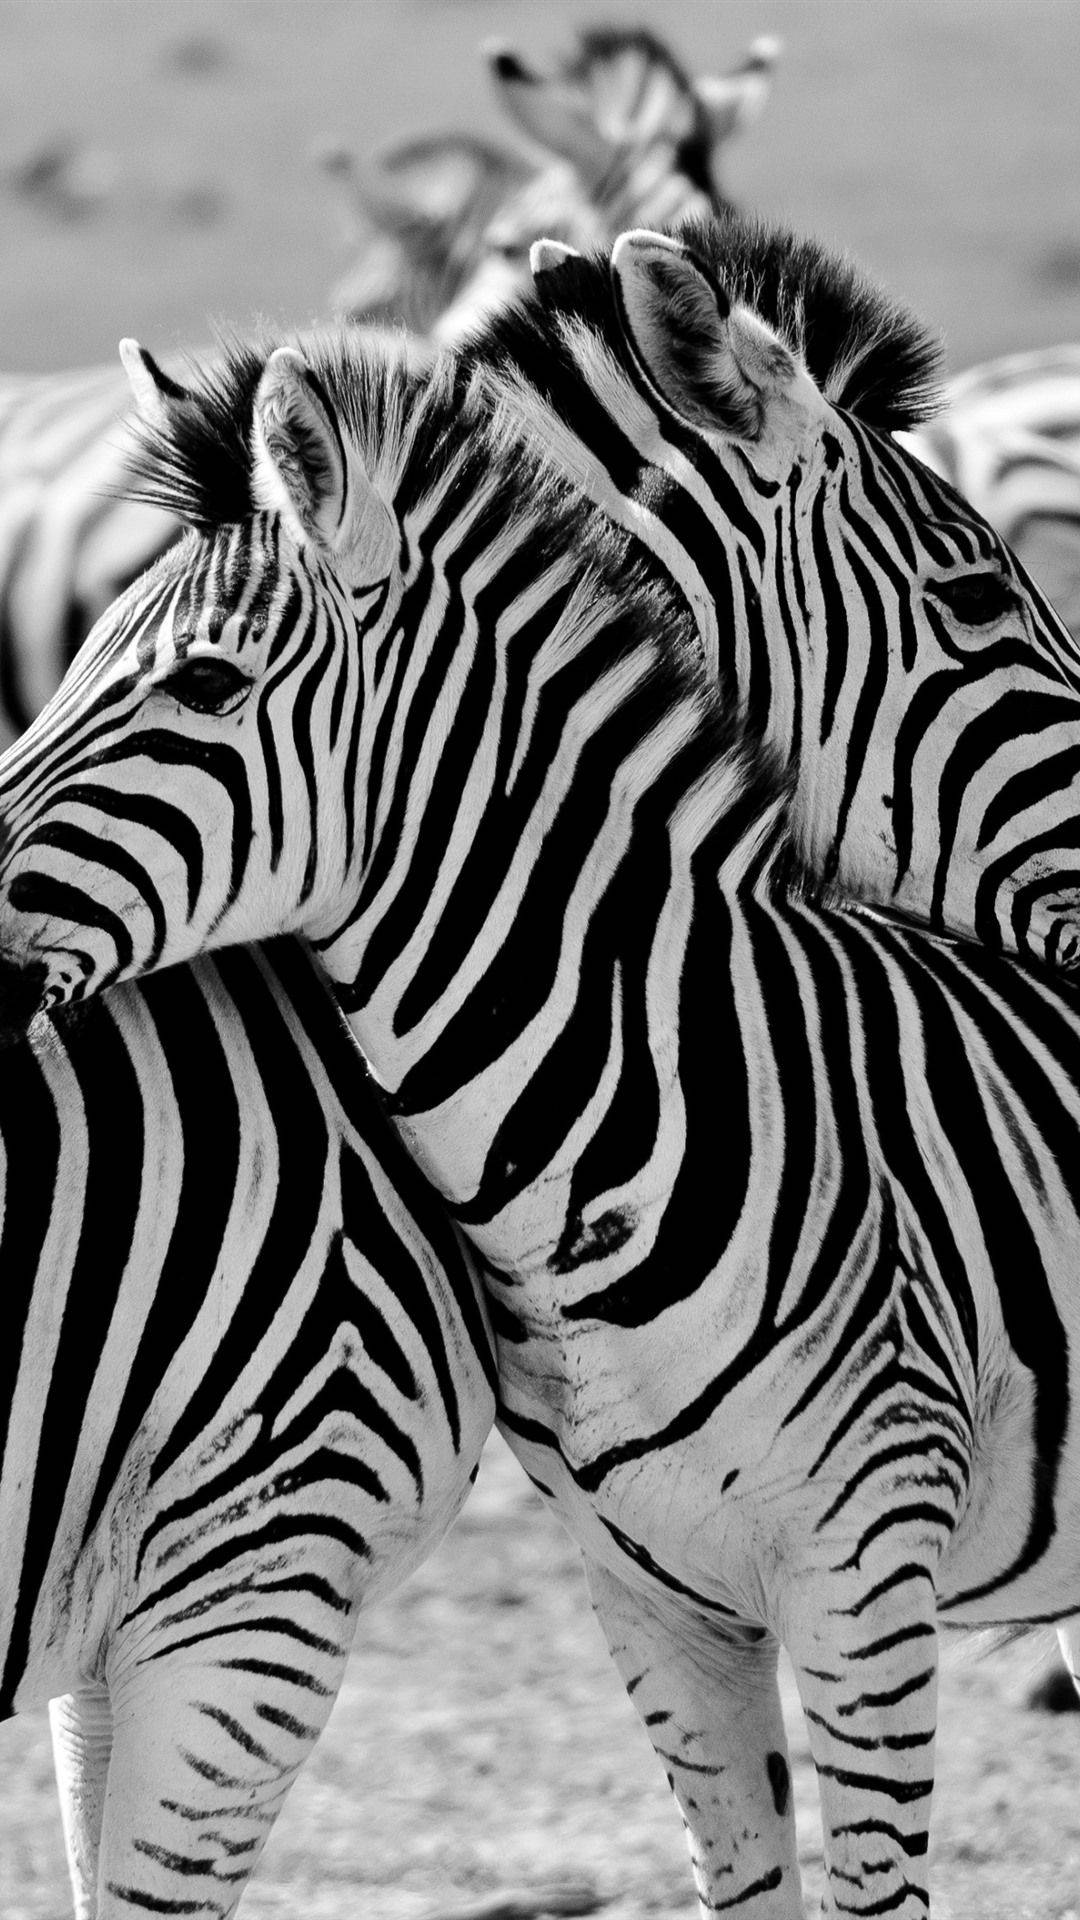 Majestic Zebras In The Wild African Plains With An Iphone